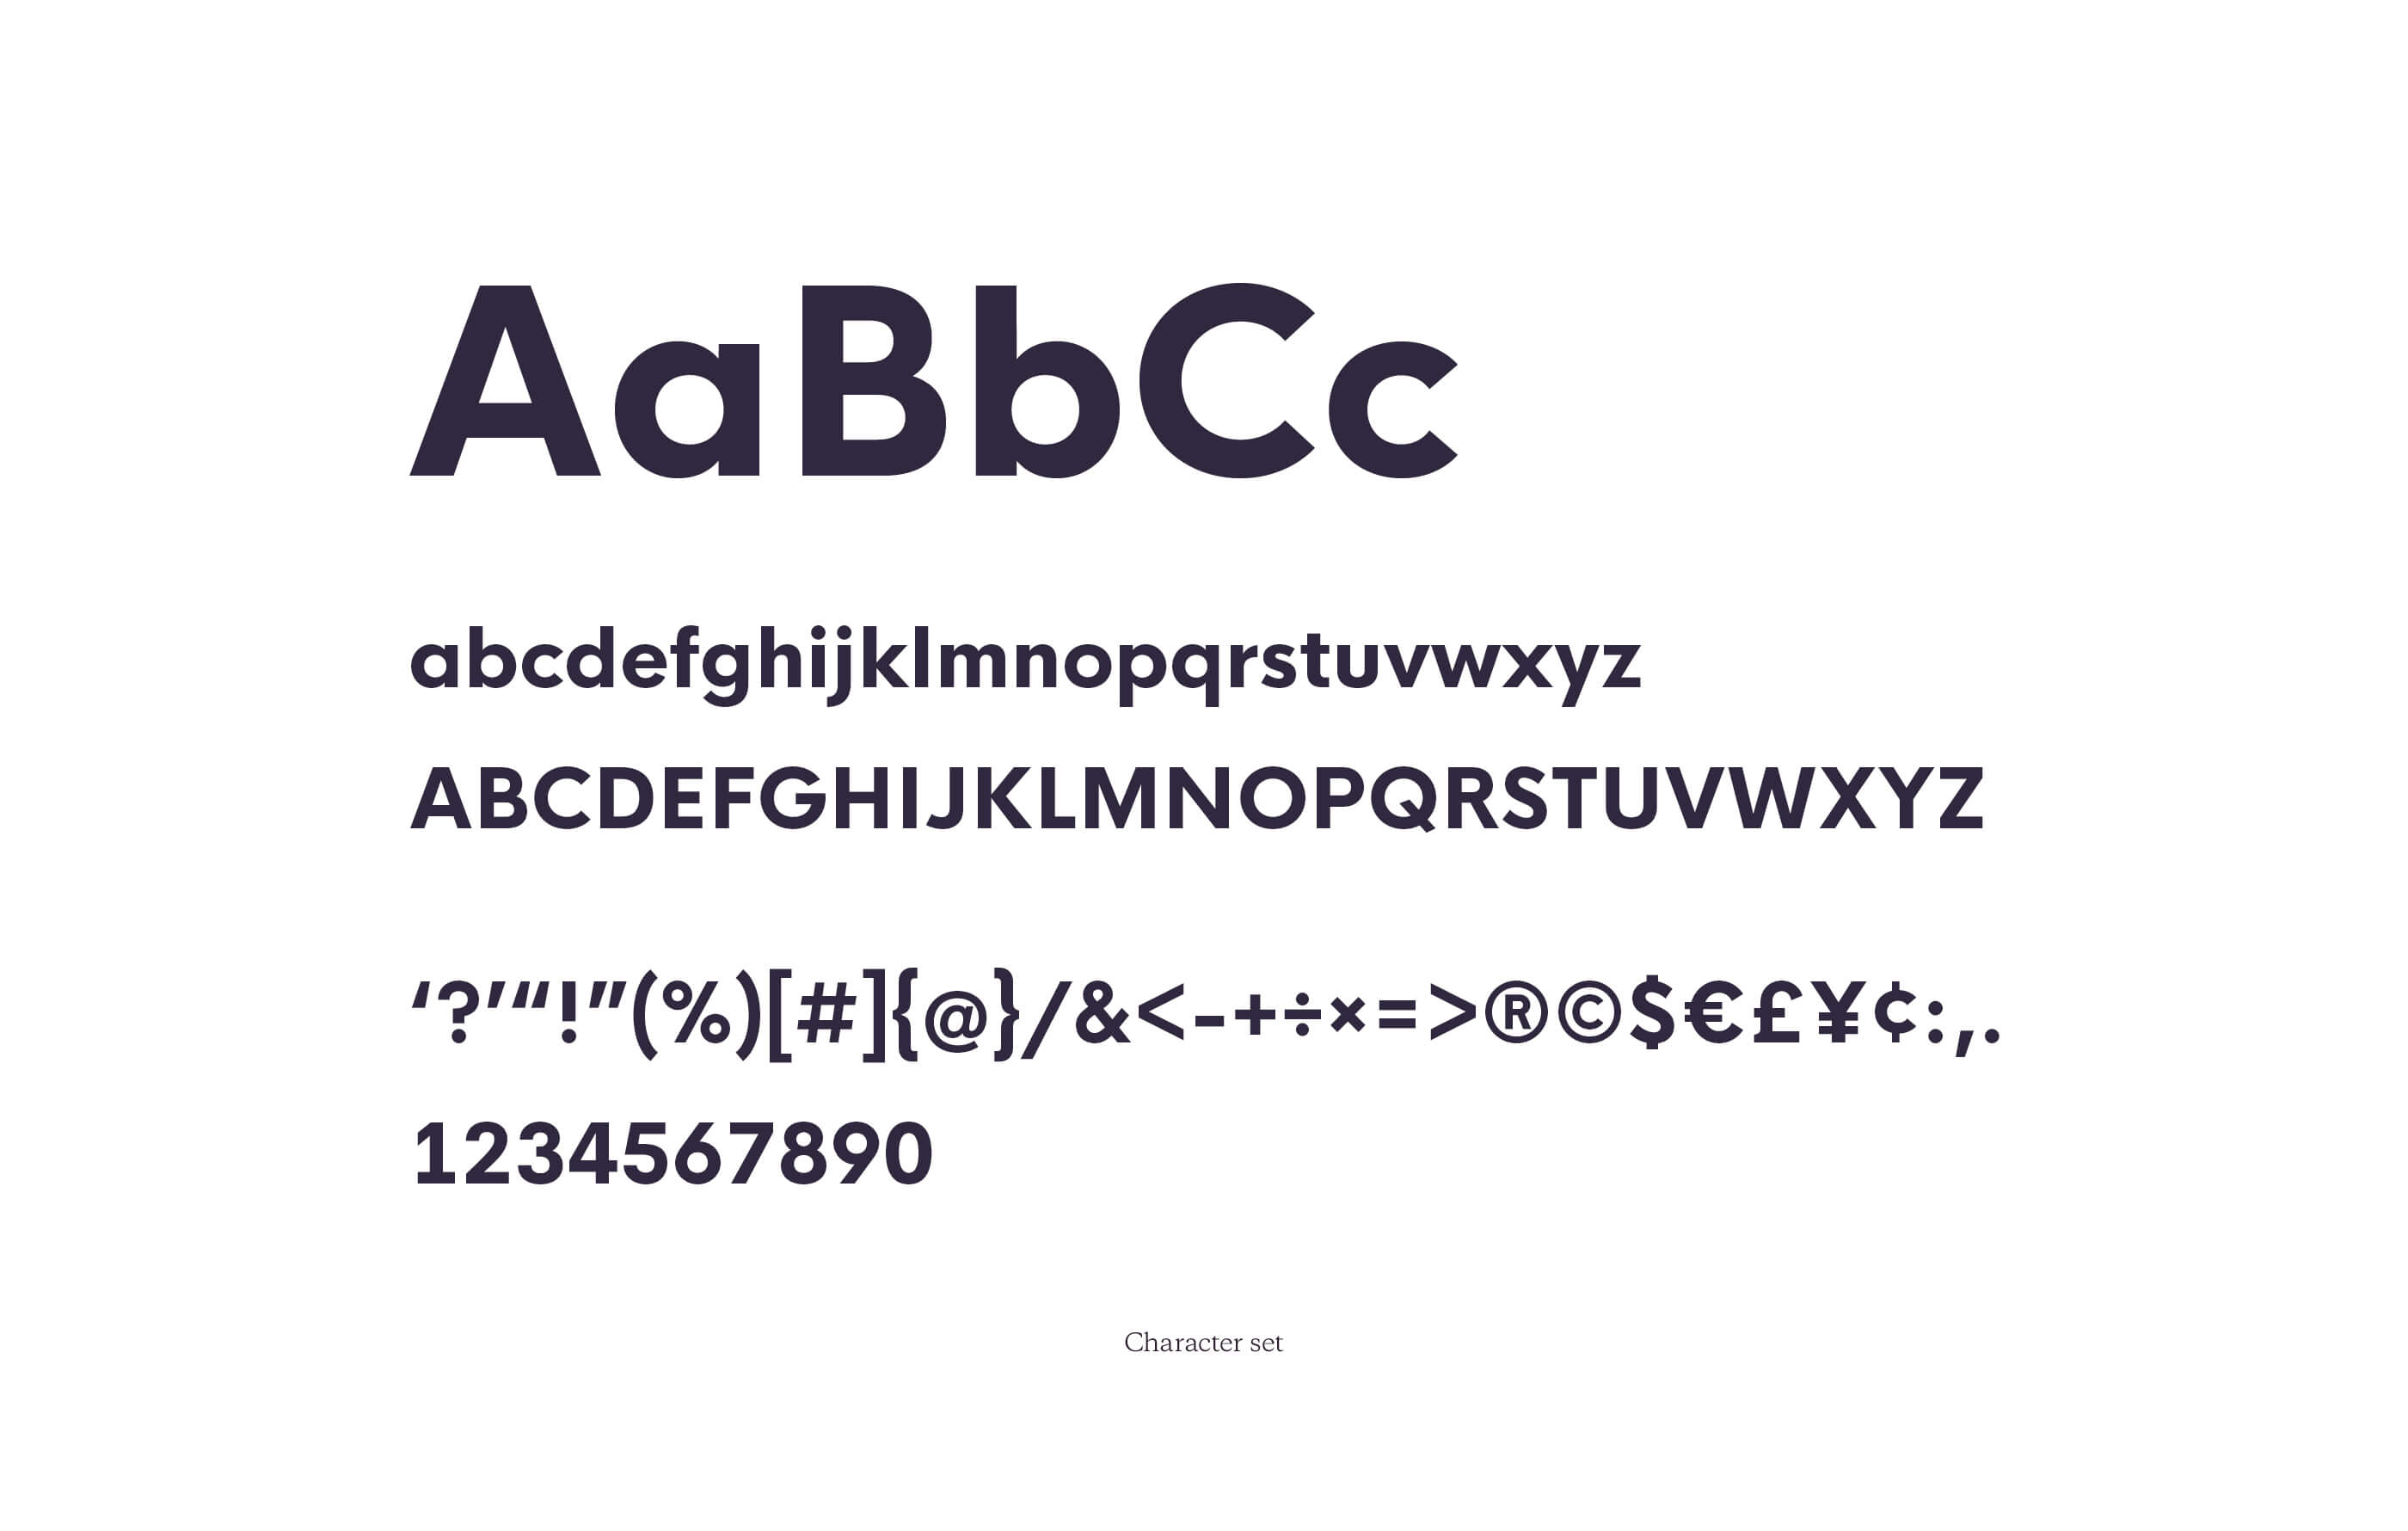 Full character set of the new typography used in the brand development and style guide